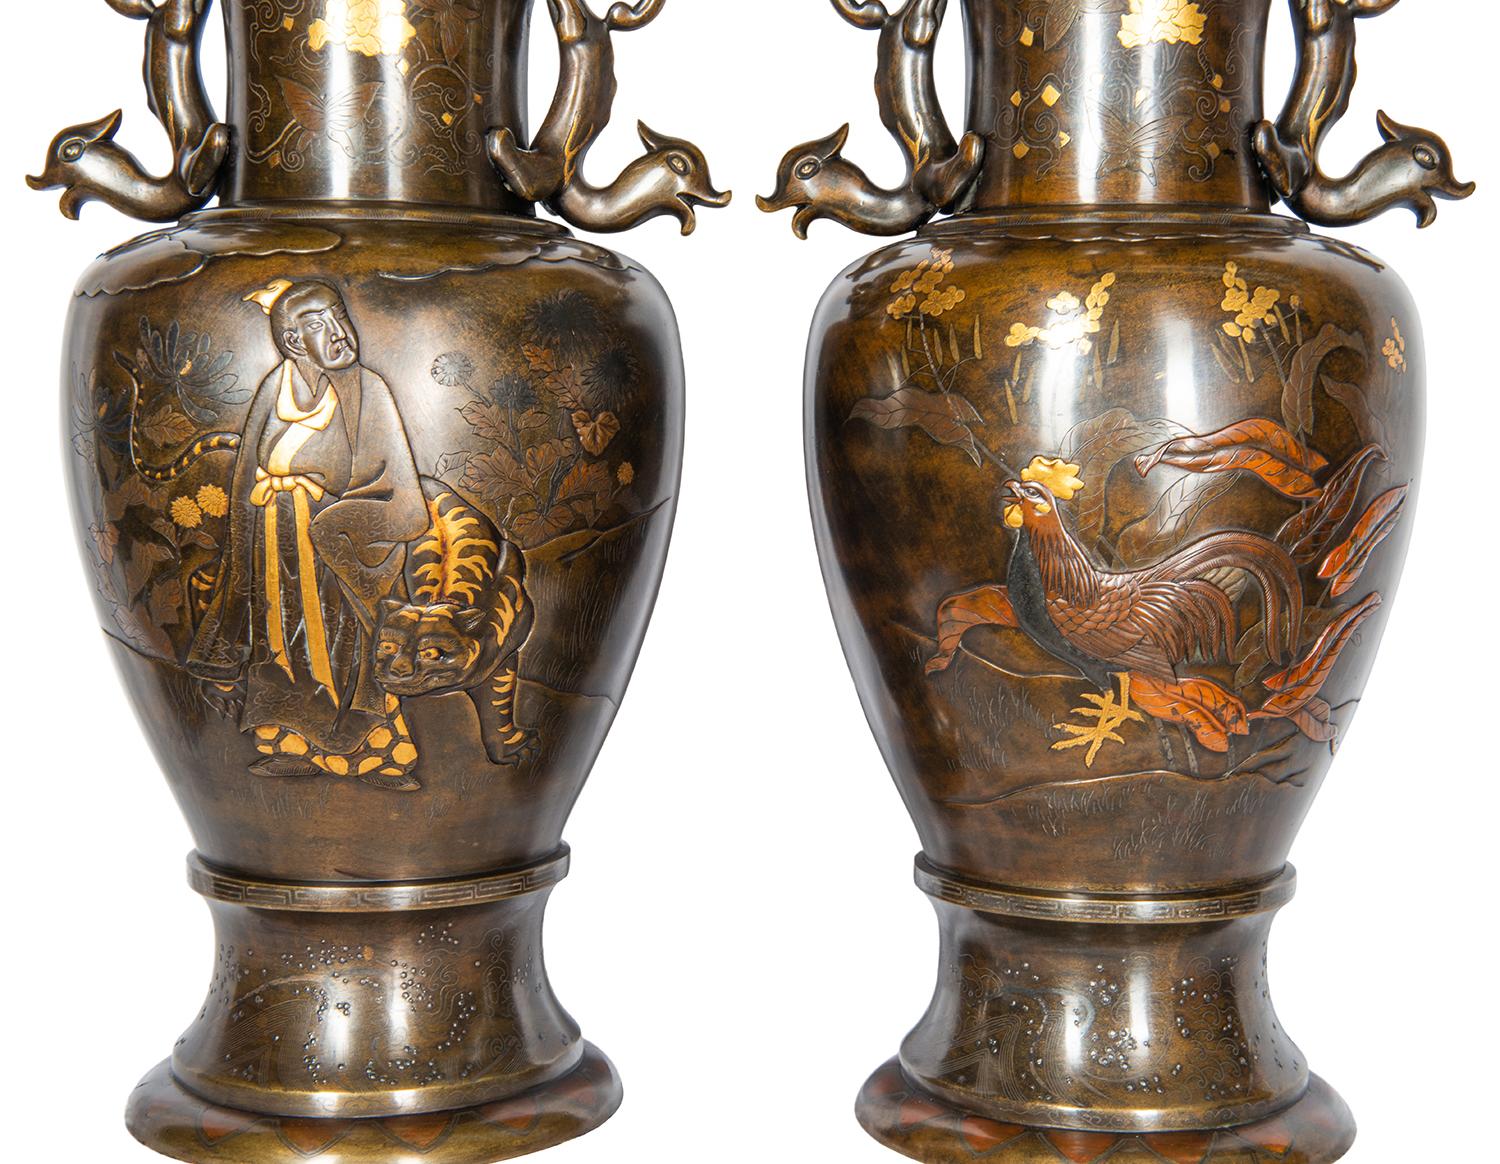 A fine quality pair of late 19th century, Meiji period (1868-1912) Miyao style patinated and engraved bronze vases with mythical dolphin like handles either side. Each with scenes of cockerels among foliage, one with a scholar walking through the